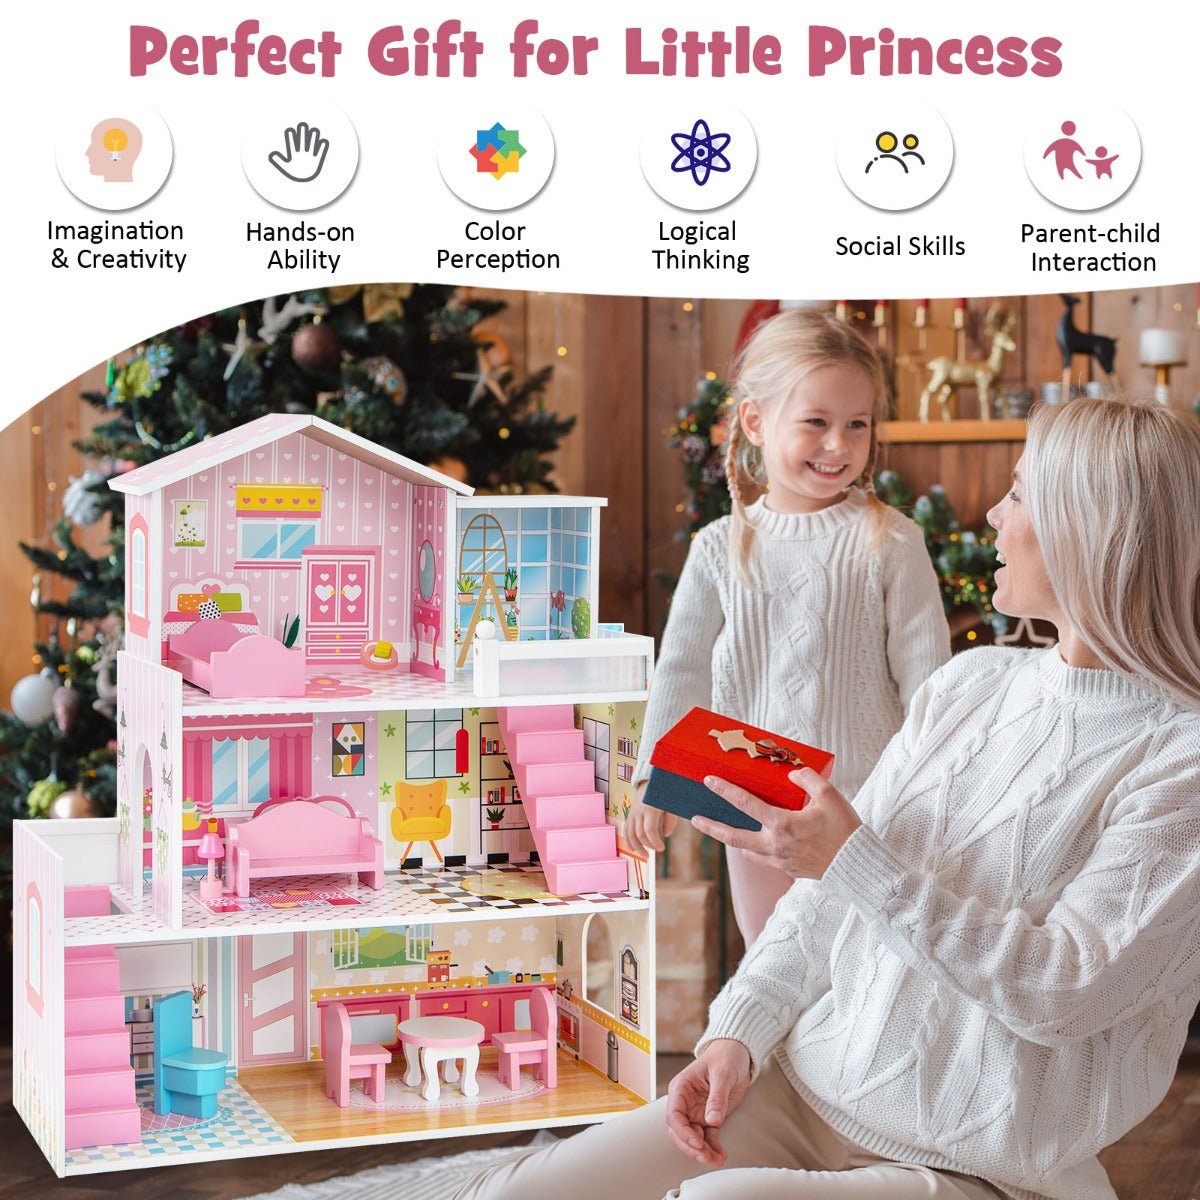 Shop Now for the Pink Wooden Dollhouse